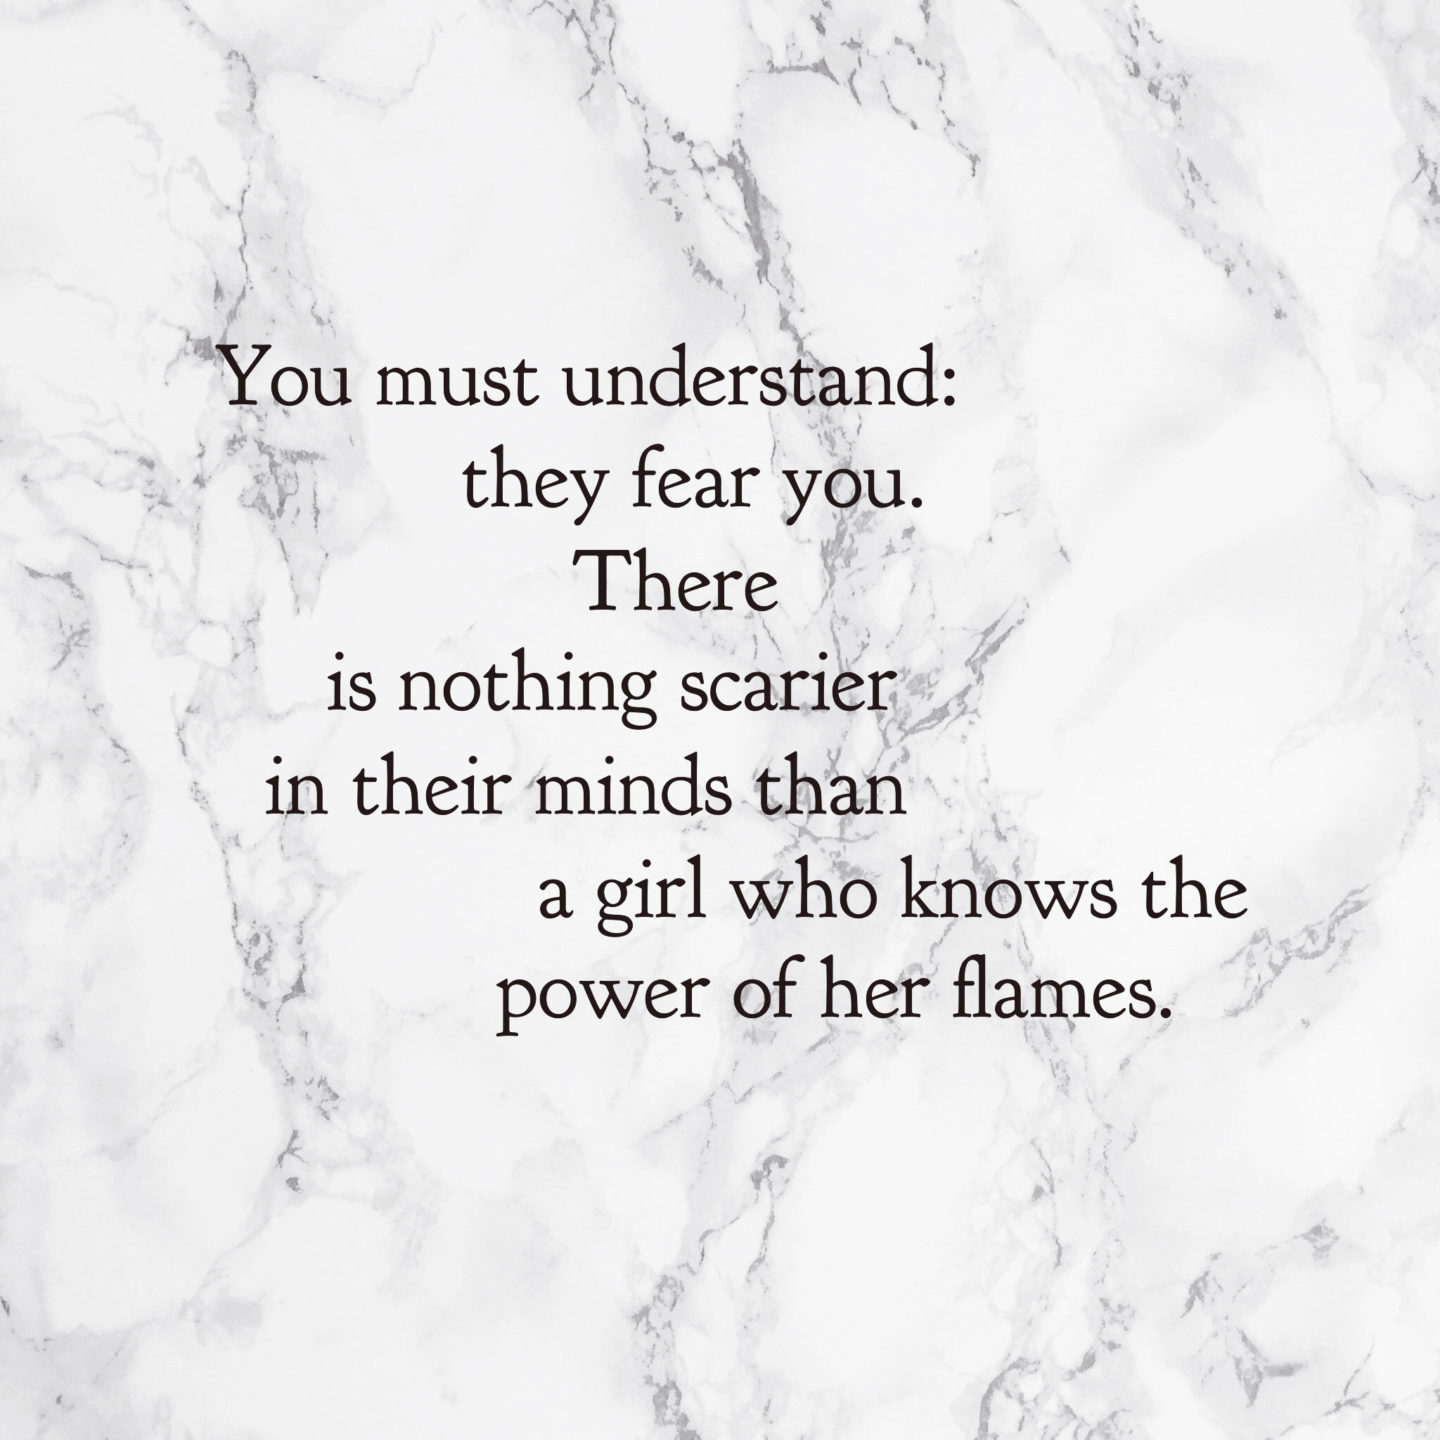 Know-Your-Power-quote-nikita gil